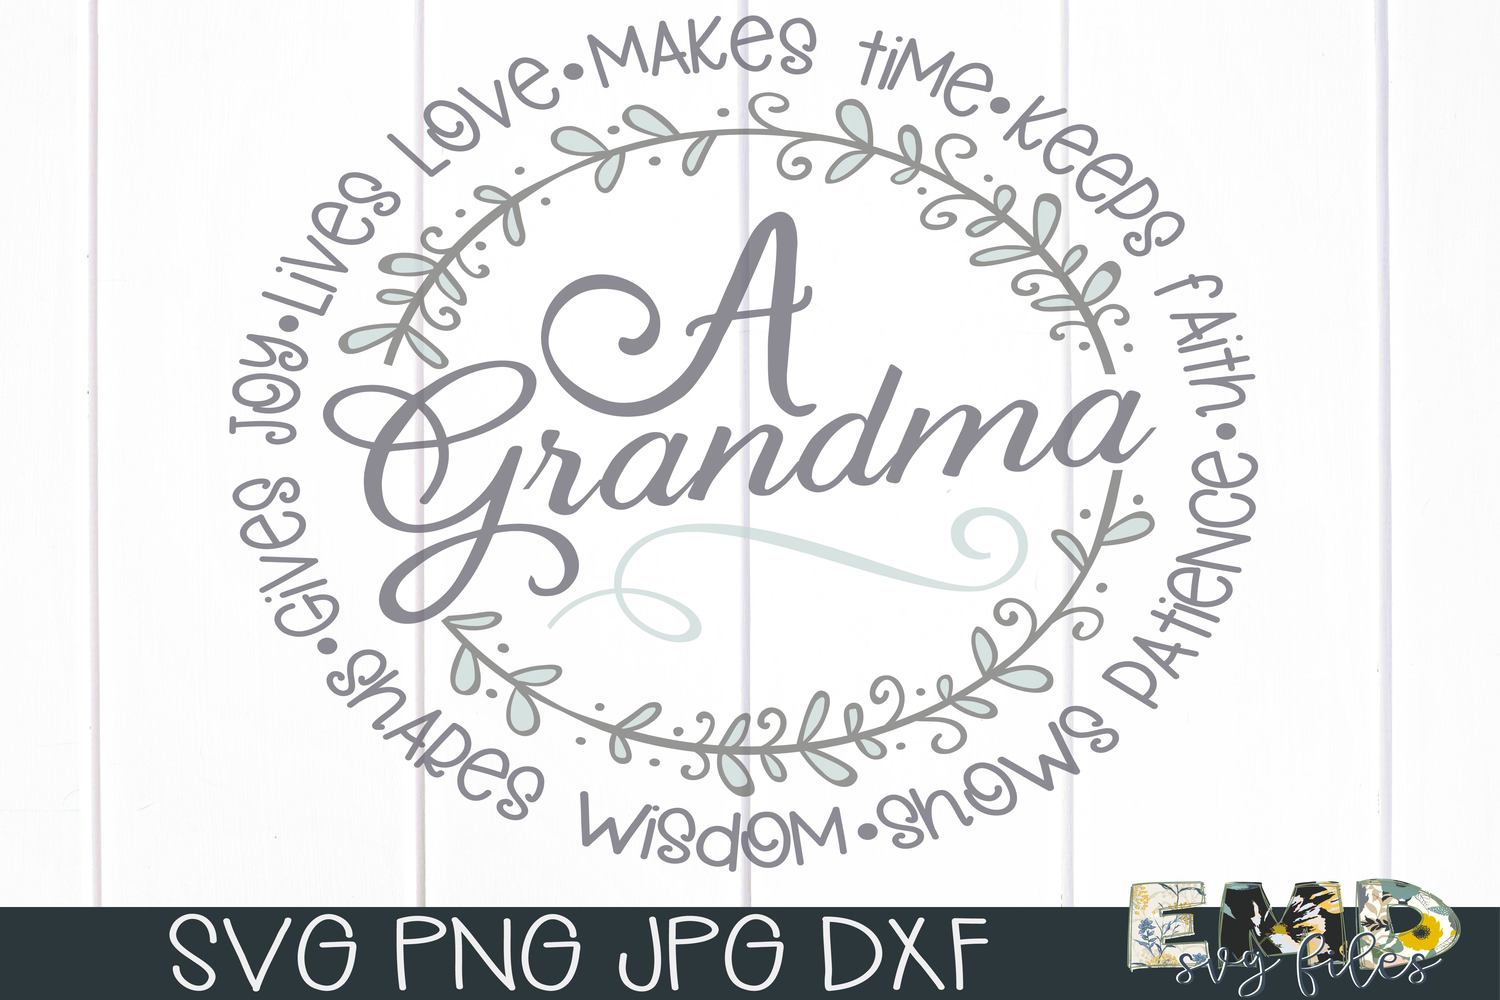 Download Grandma | Mothers Day Svg Files and Cut Files For Crafting